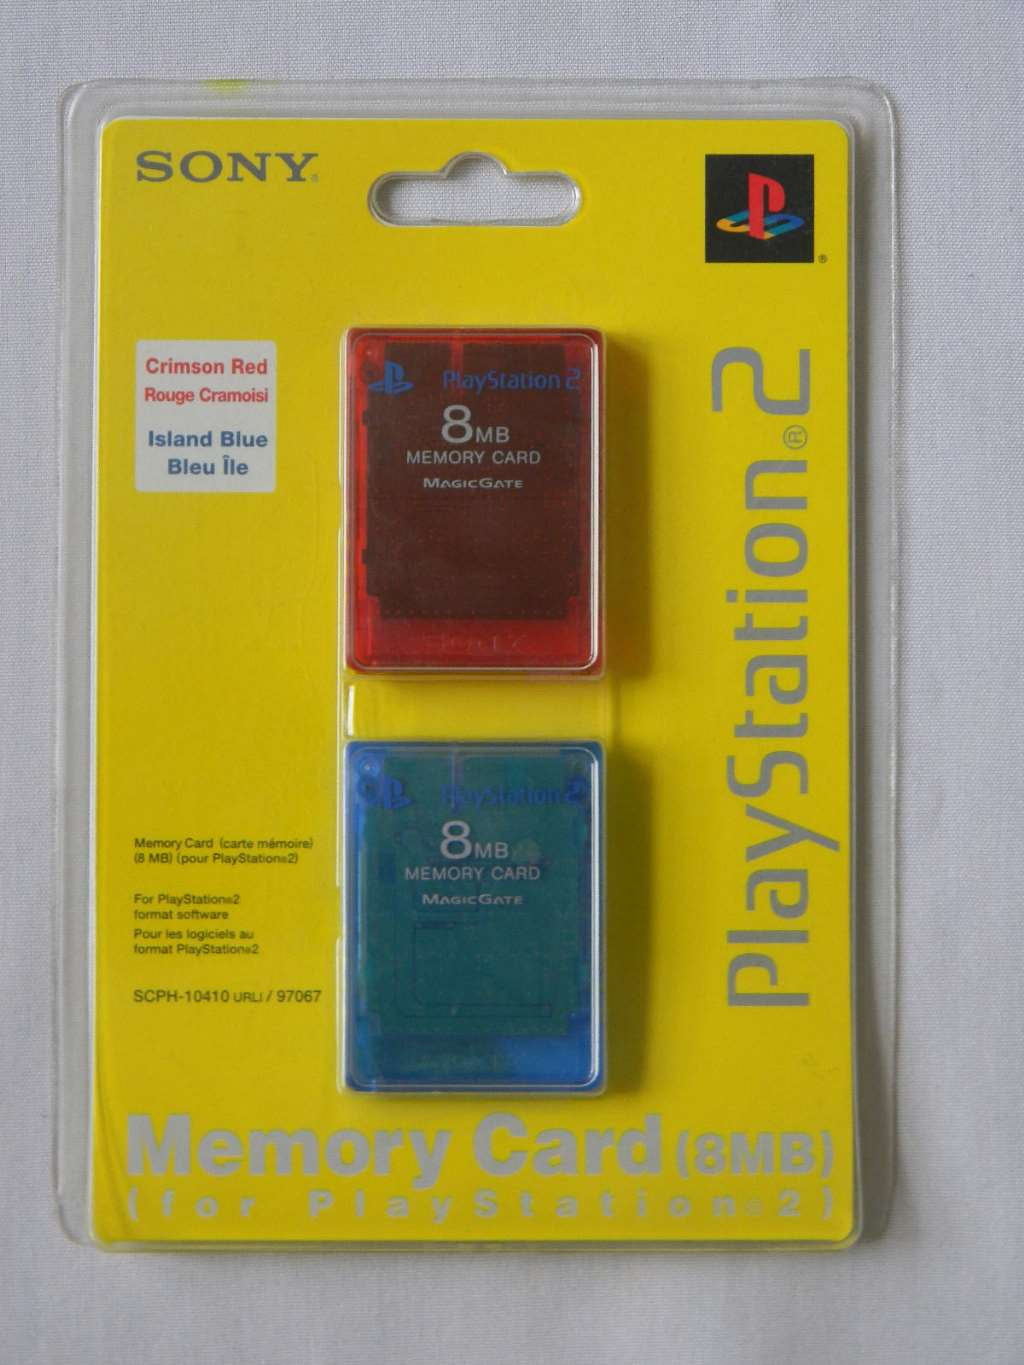 where can i buy a ps2 memory card